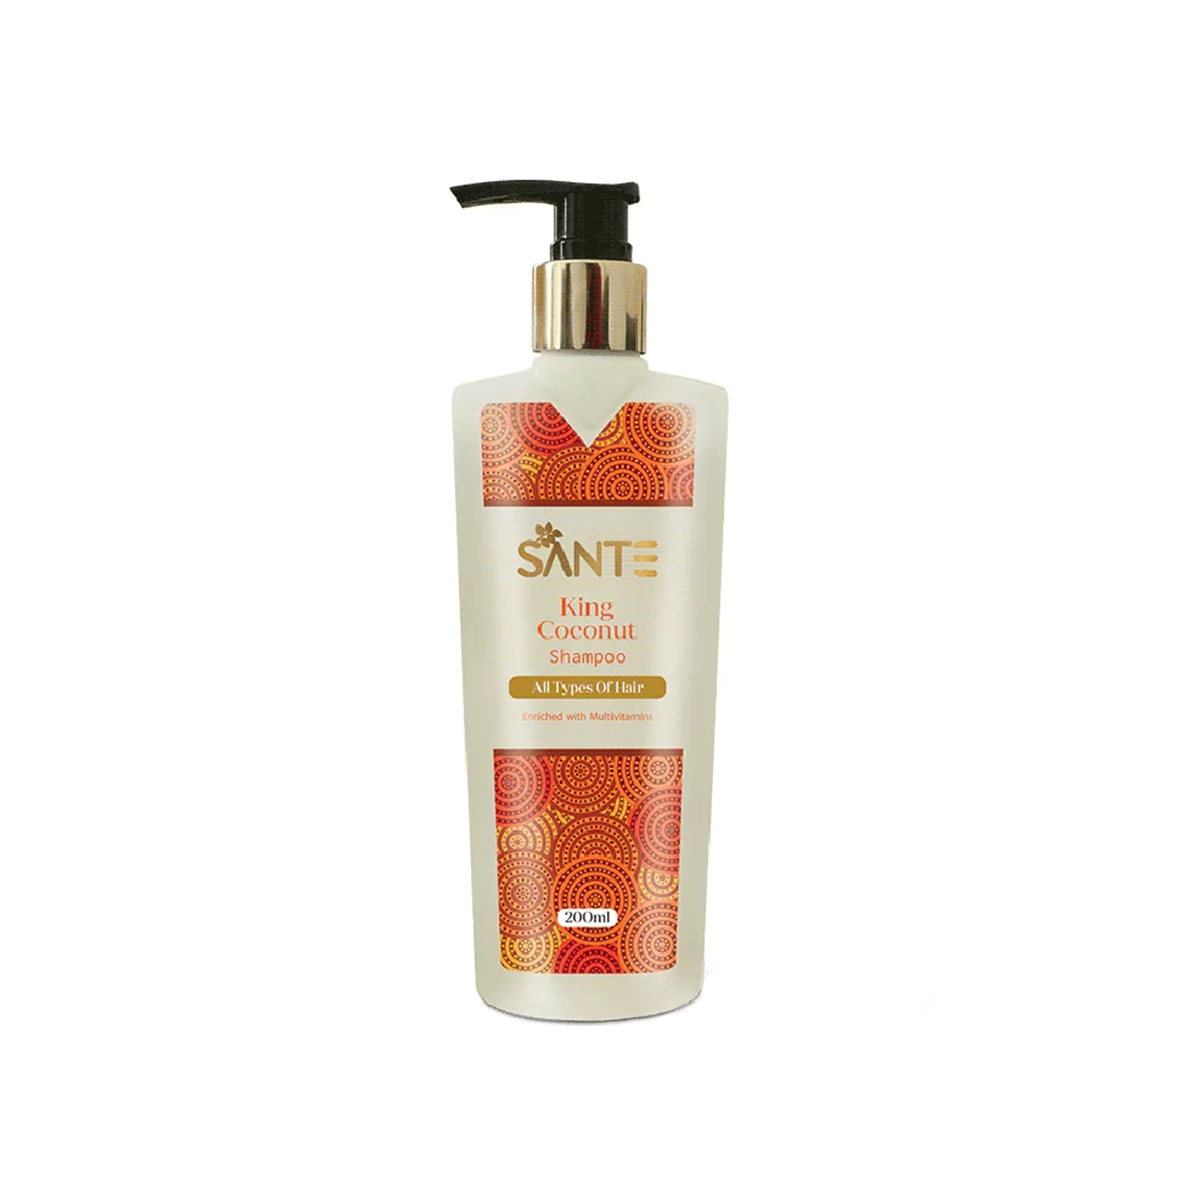 First product image of Sante King Coconut Shampoo 200ml